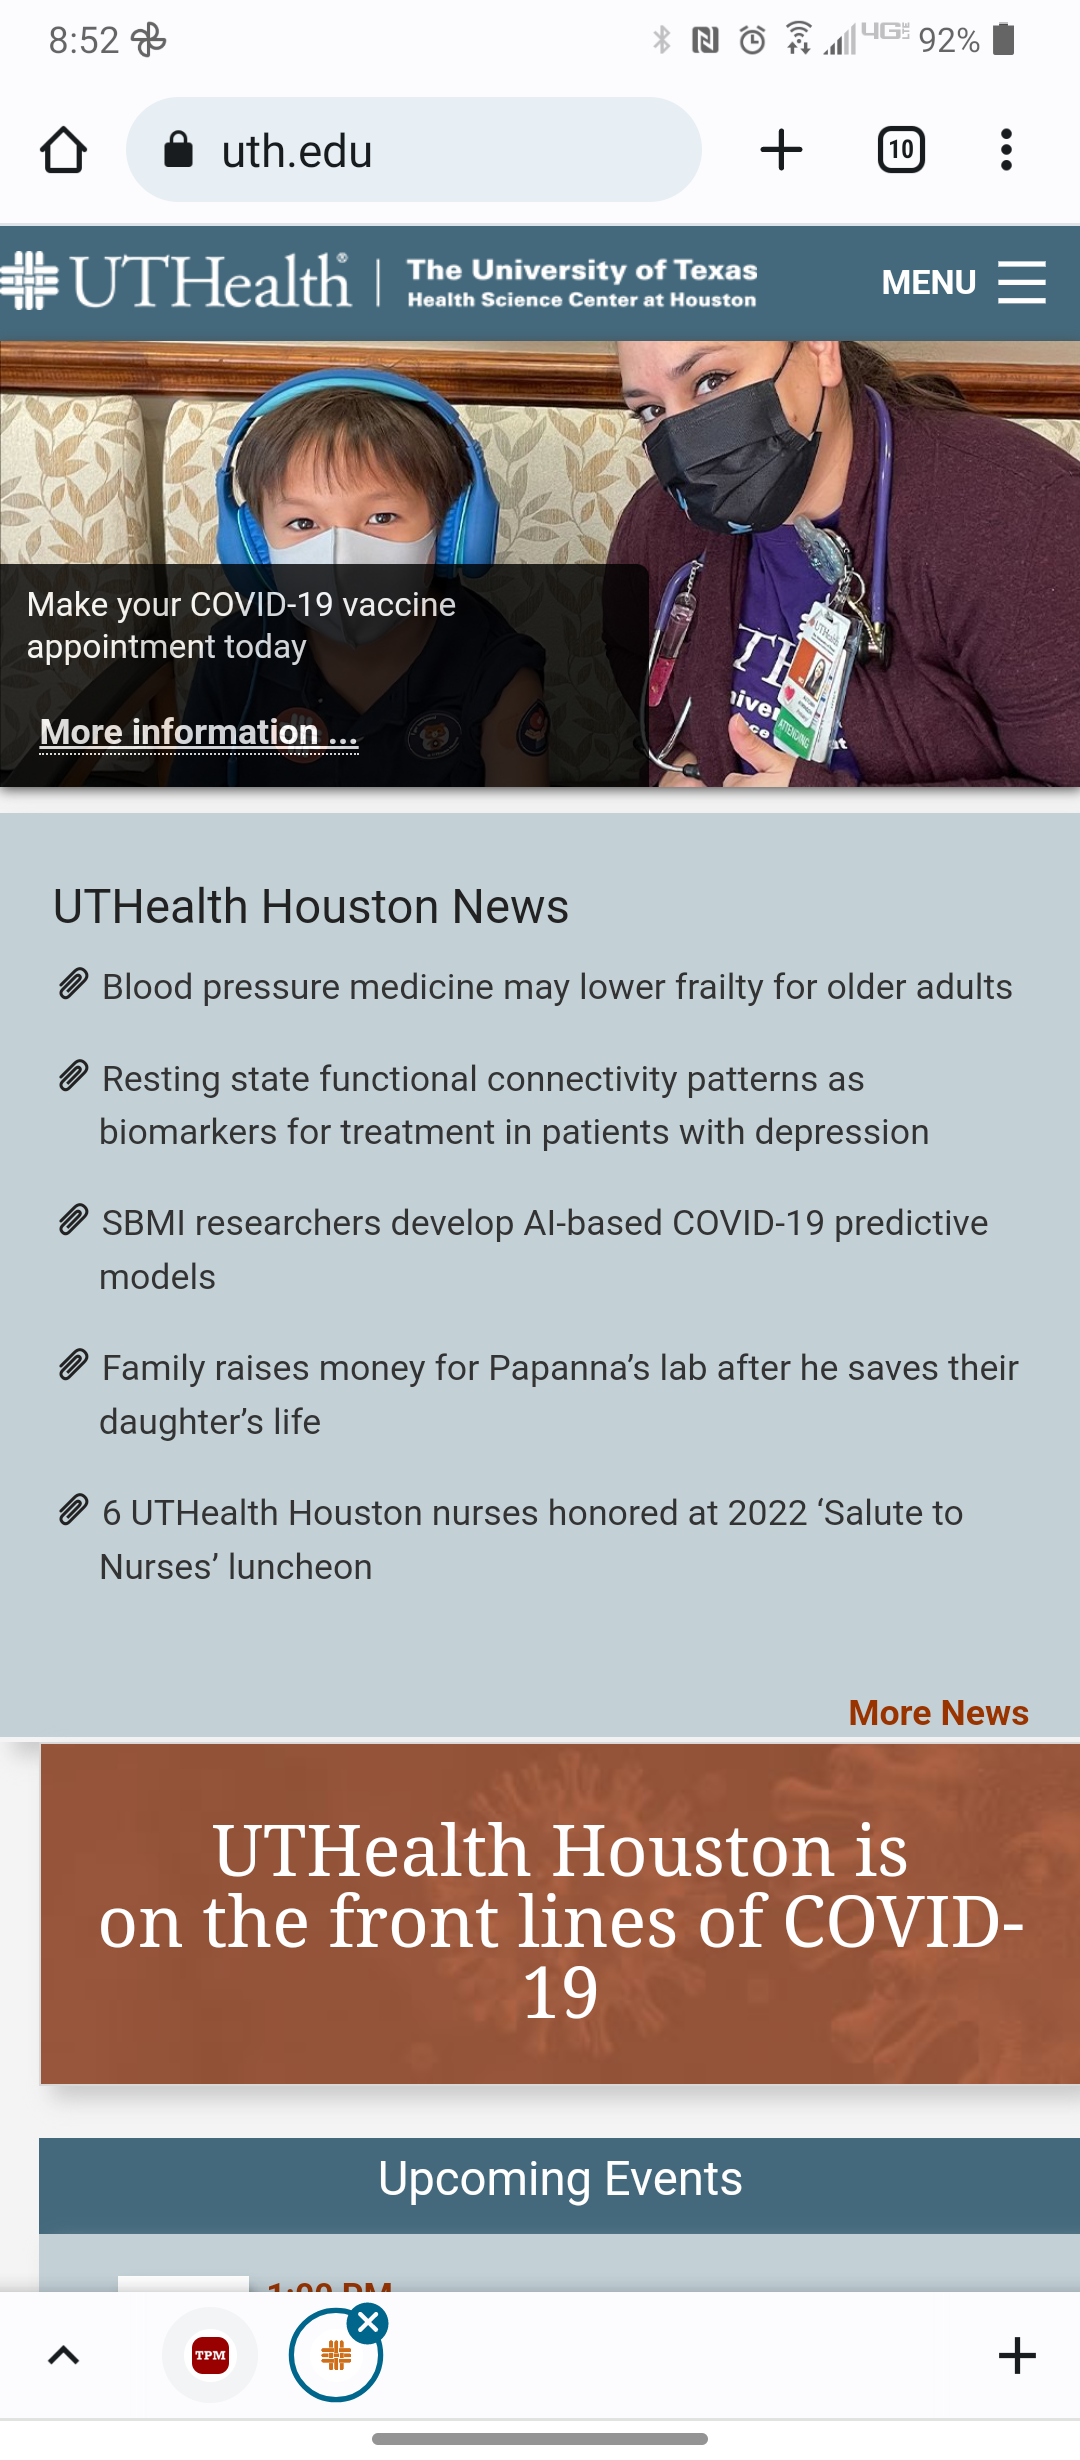 Screenshot of the UTHealth home page as displayed on a typical mobile device.